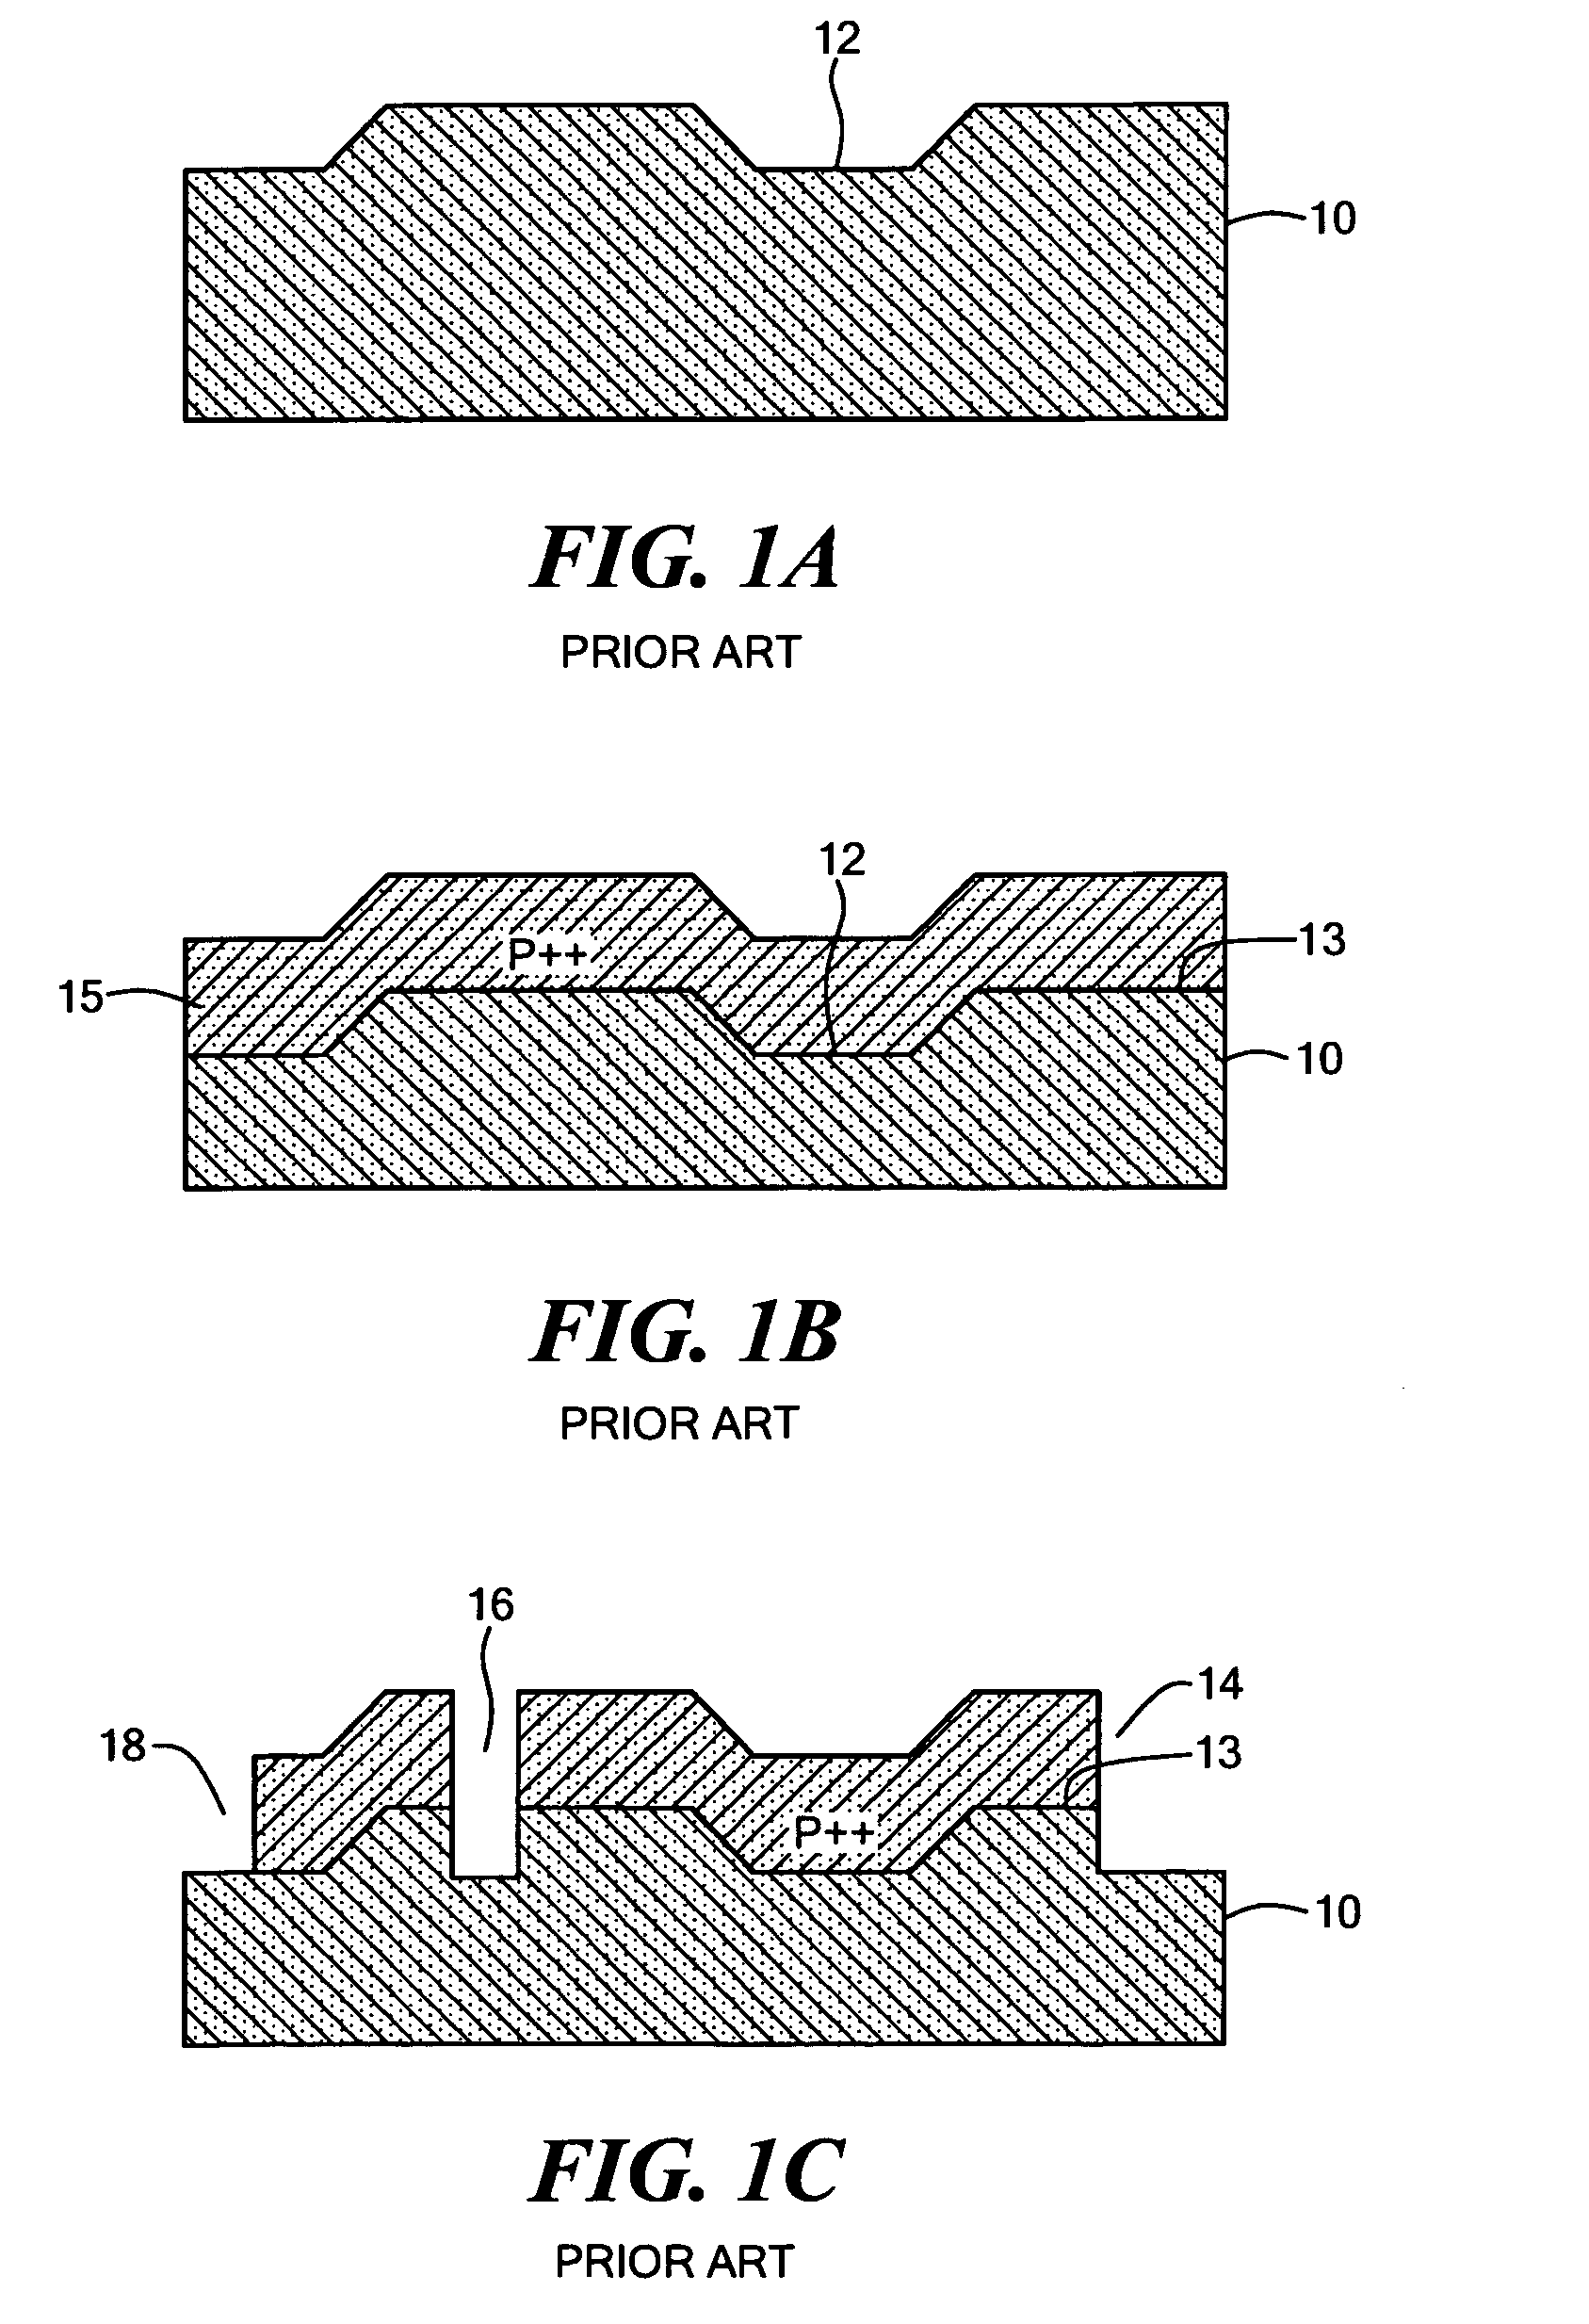 Method for fabricating micro-mechanical devices